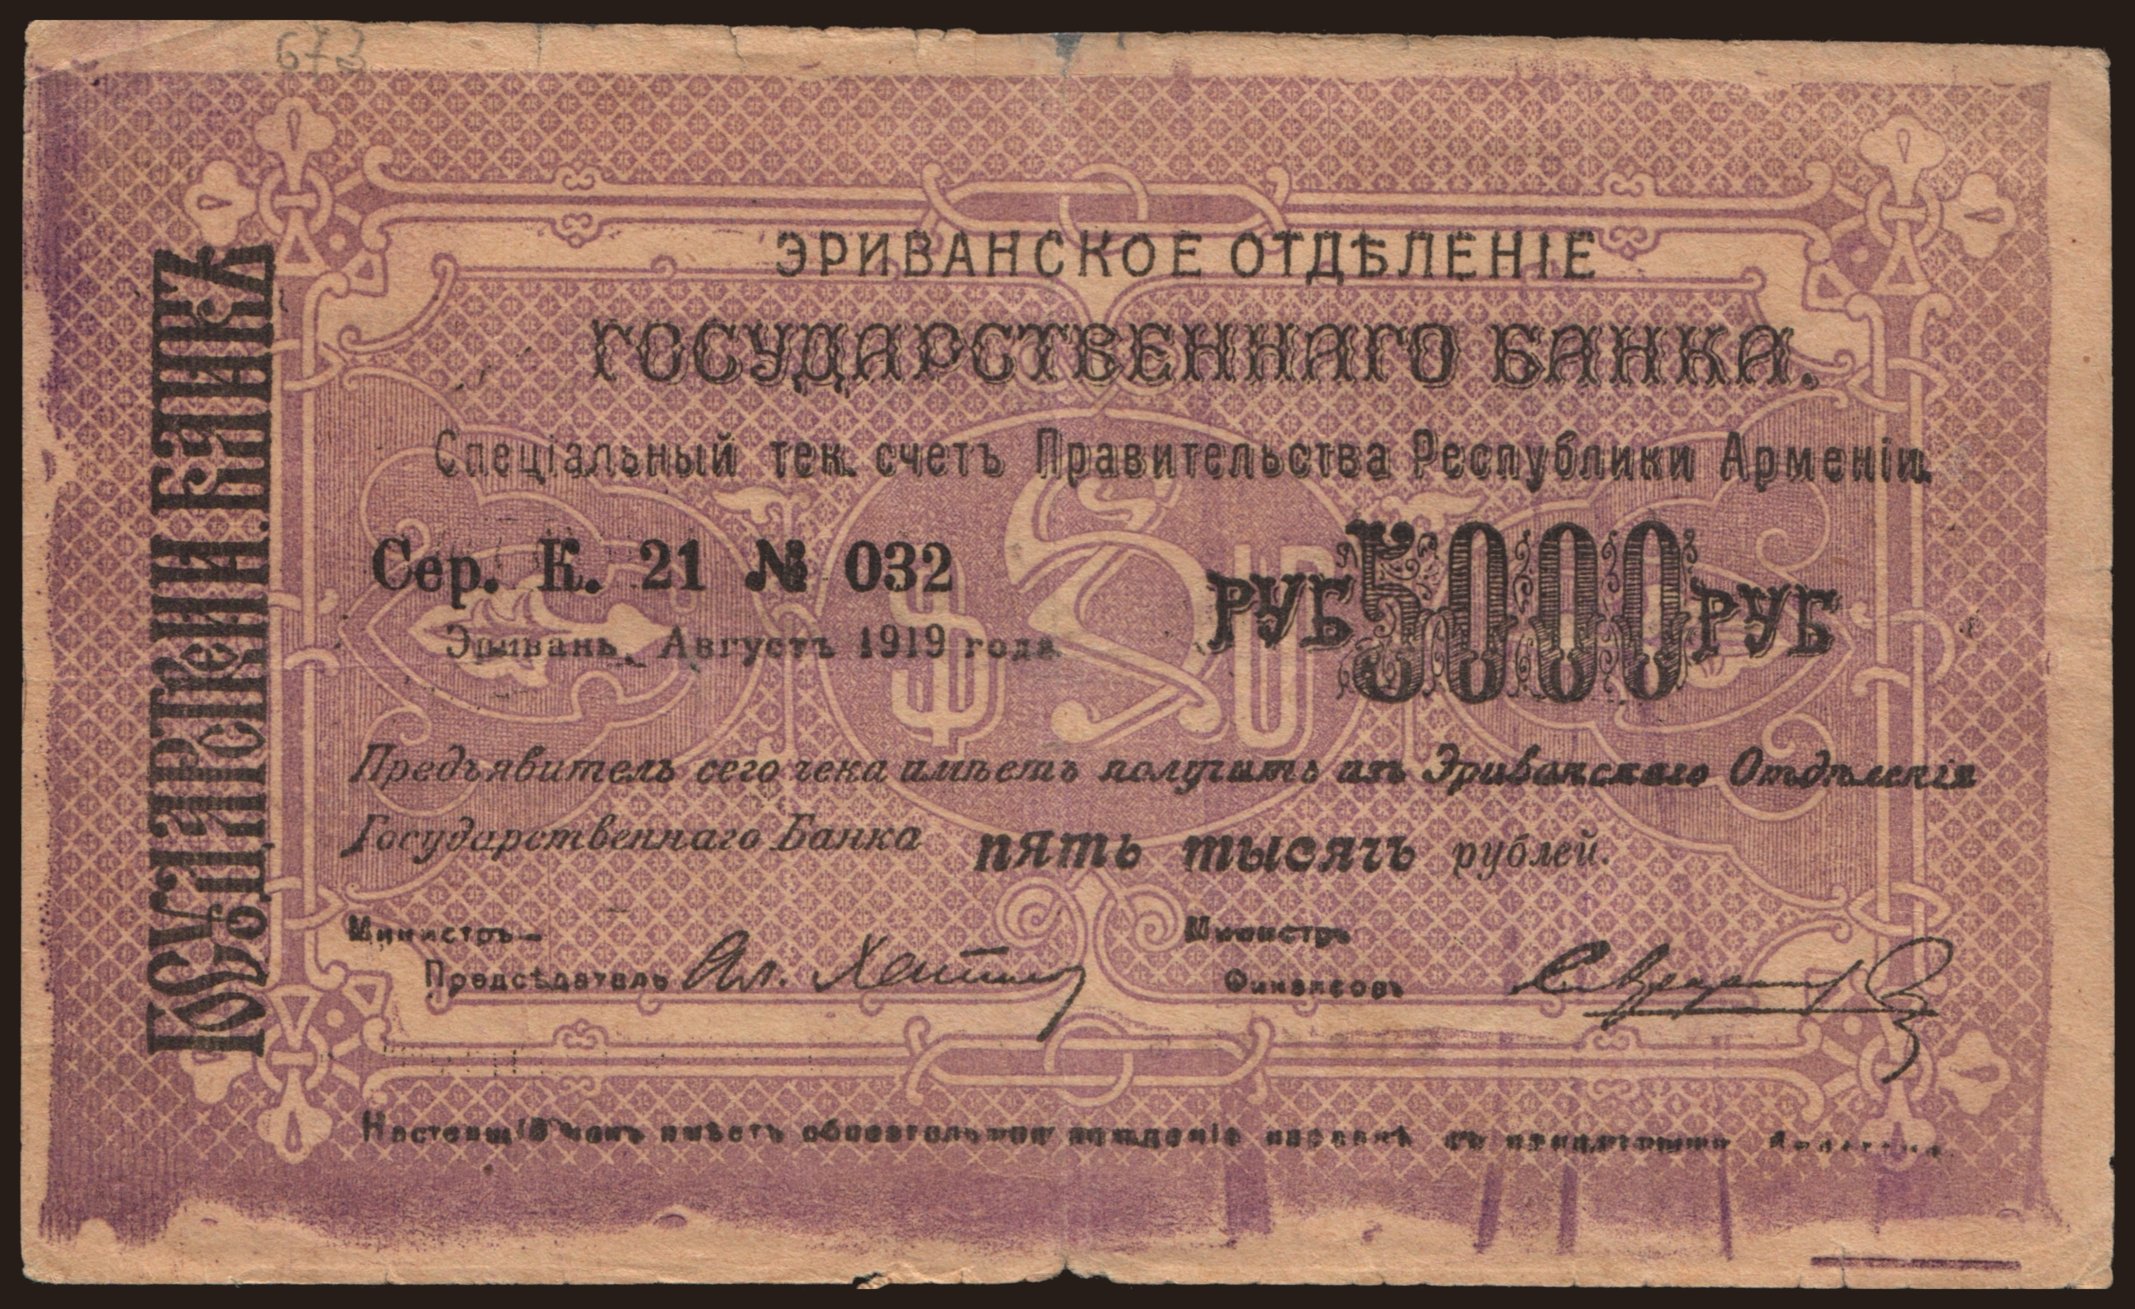 5000 rubles, 1919